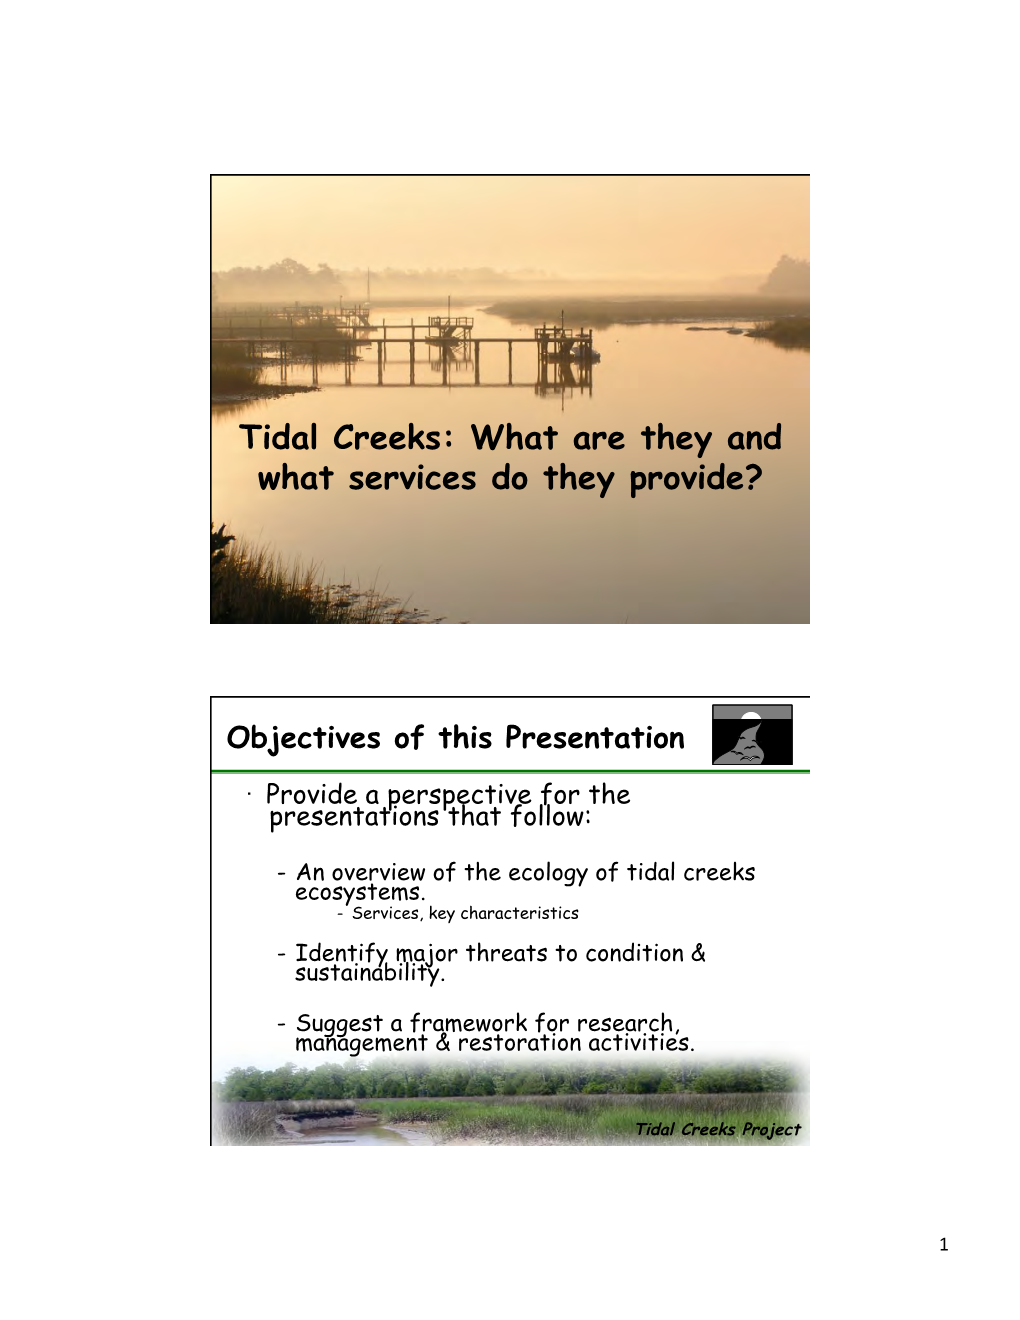 Tidal Creeks: What Are They and What Services Do They Provide?